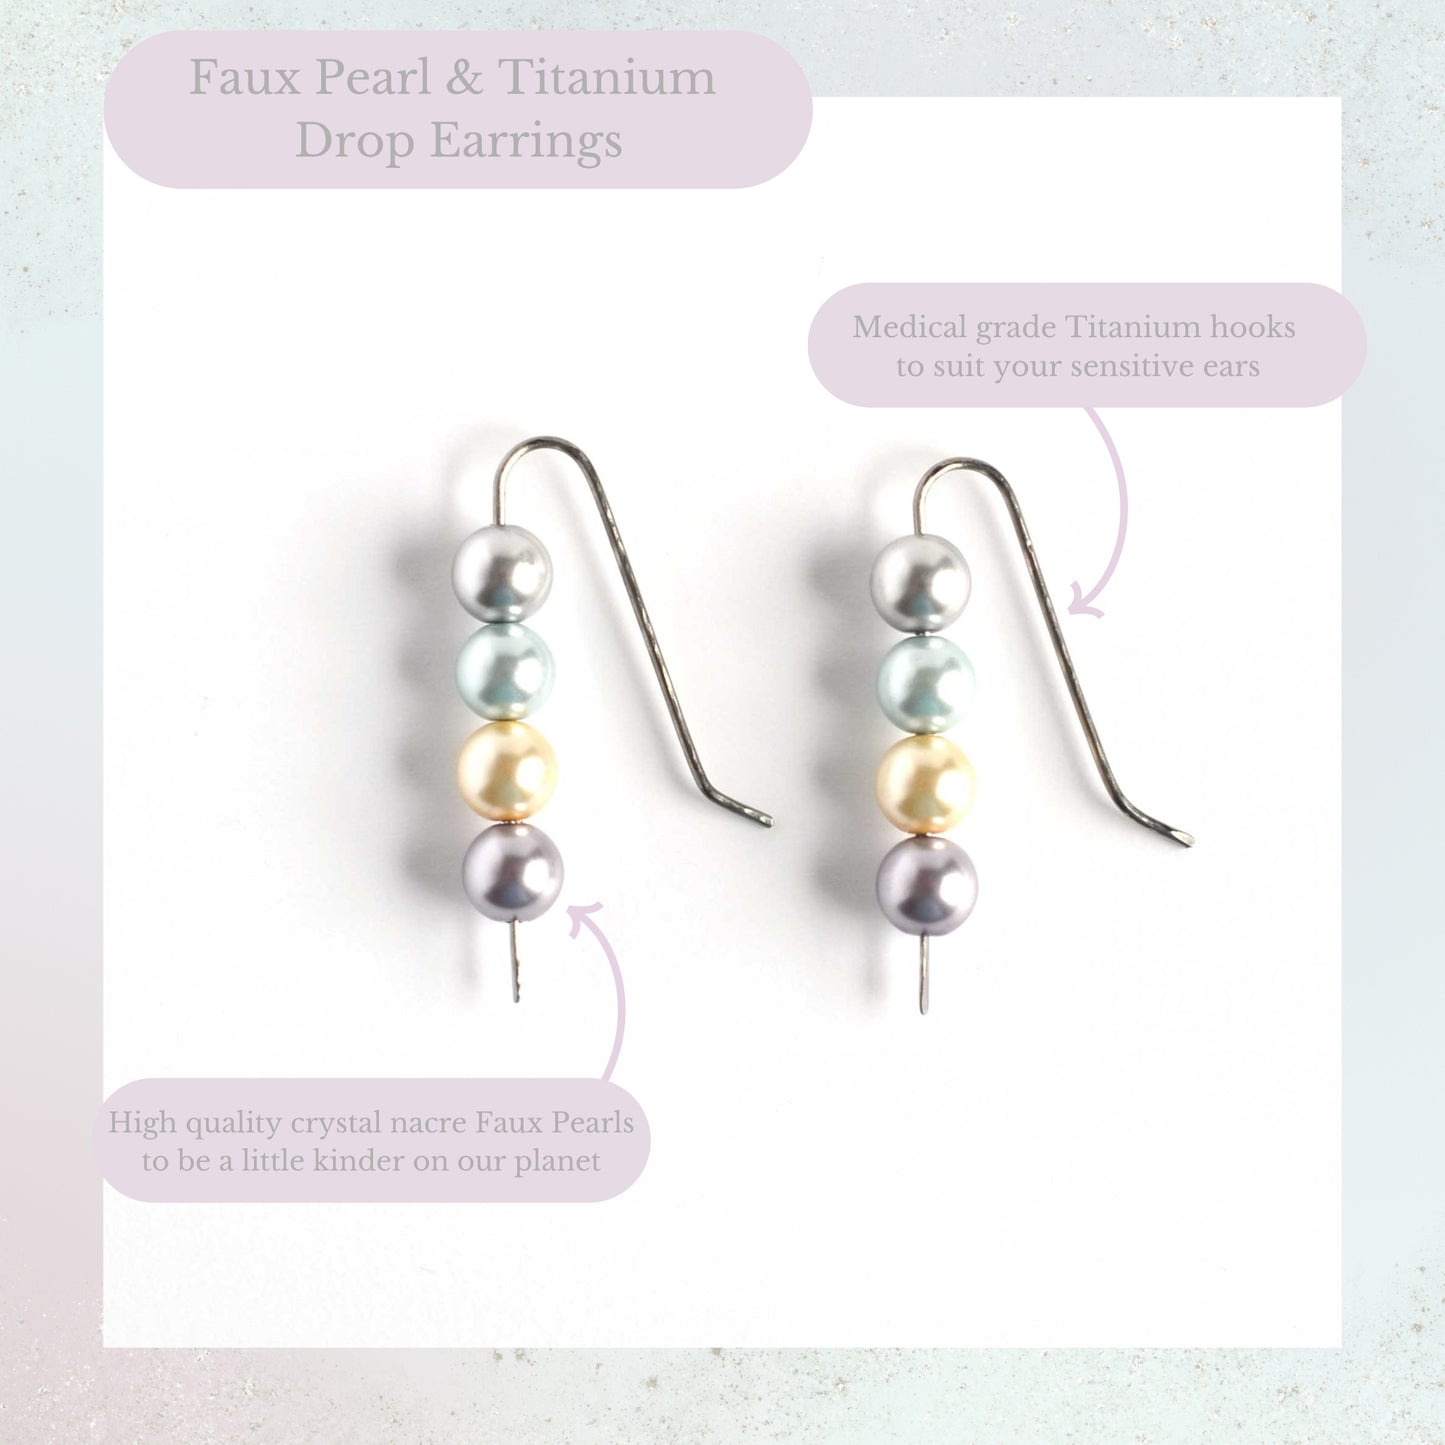 Faux pearl and Titanium drop earrings product information graphic